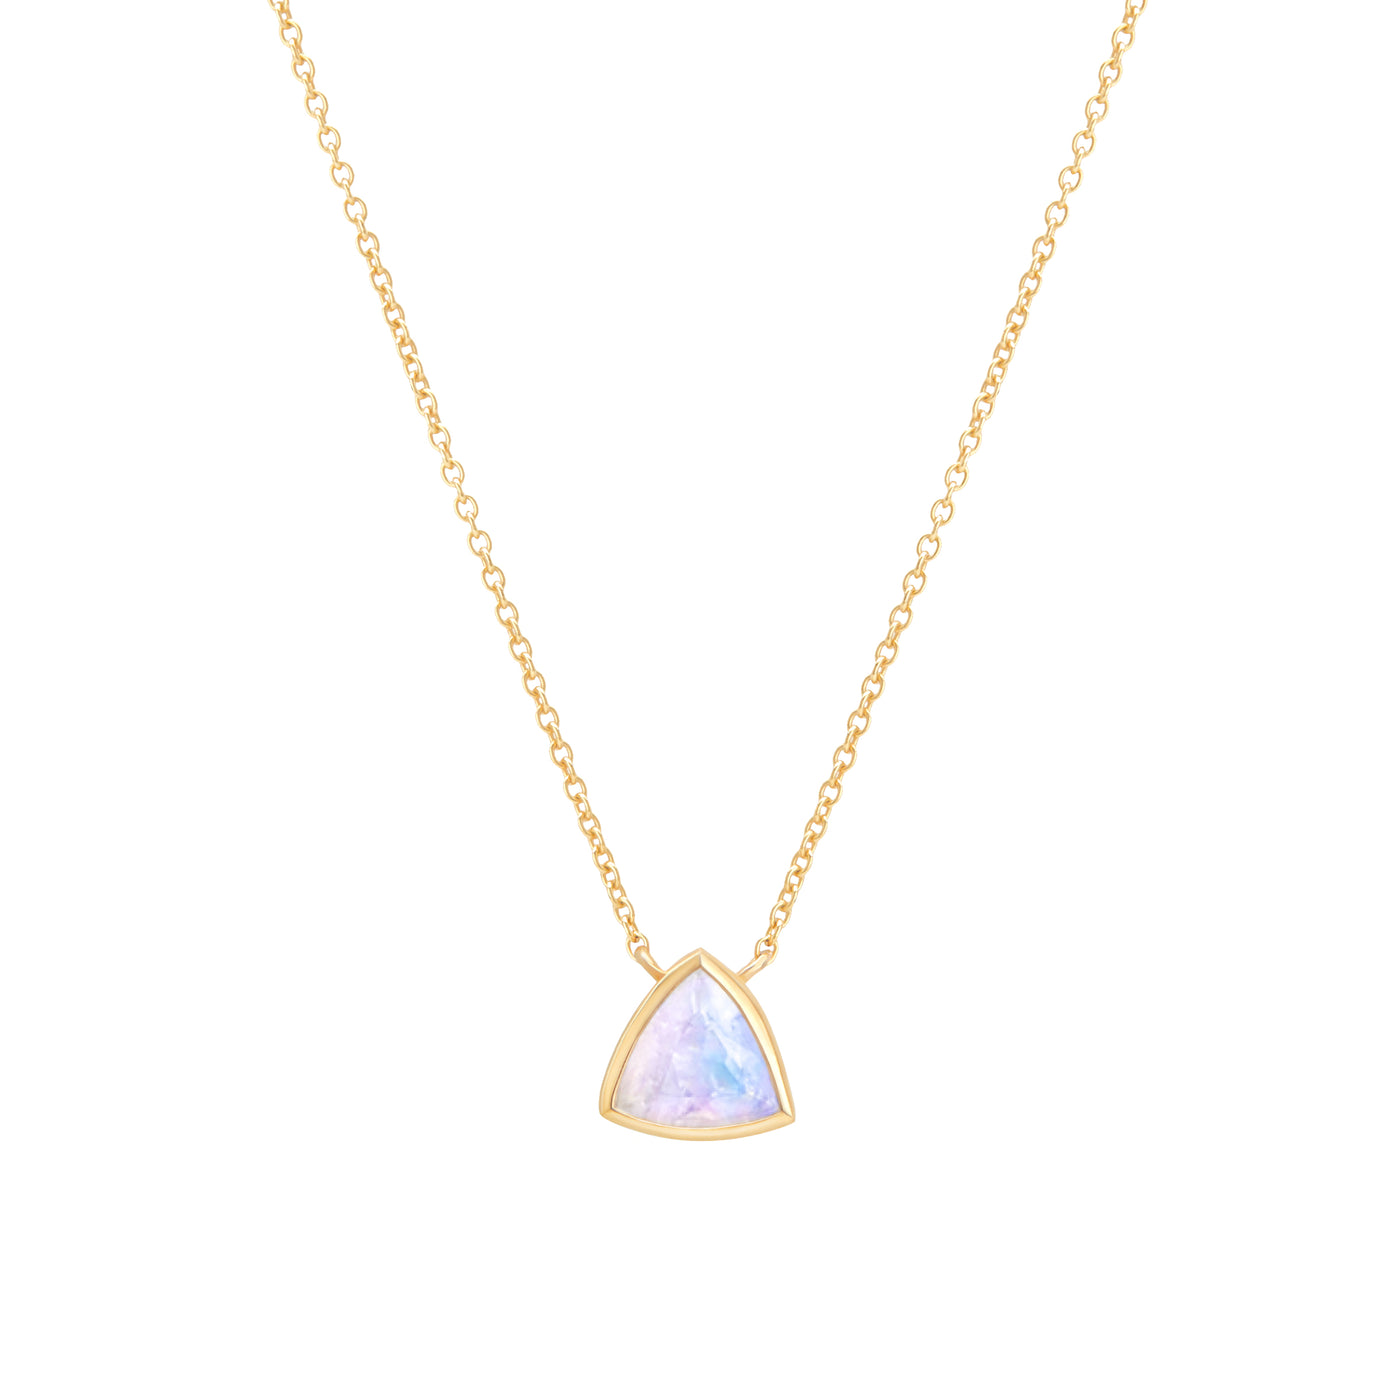 14k Yellow Gold Necklace with Moonstone in Triangle Shape on Chain Necklace with White Background